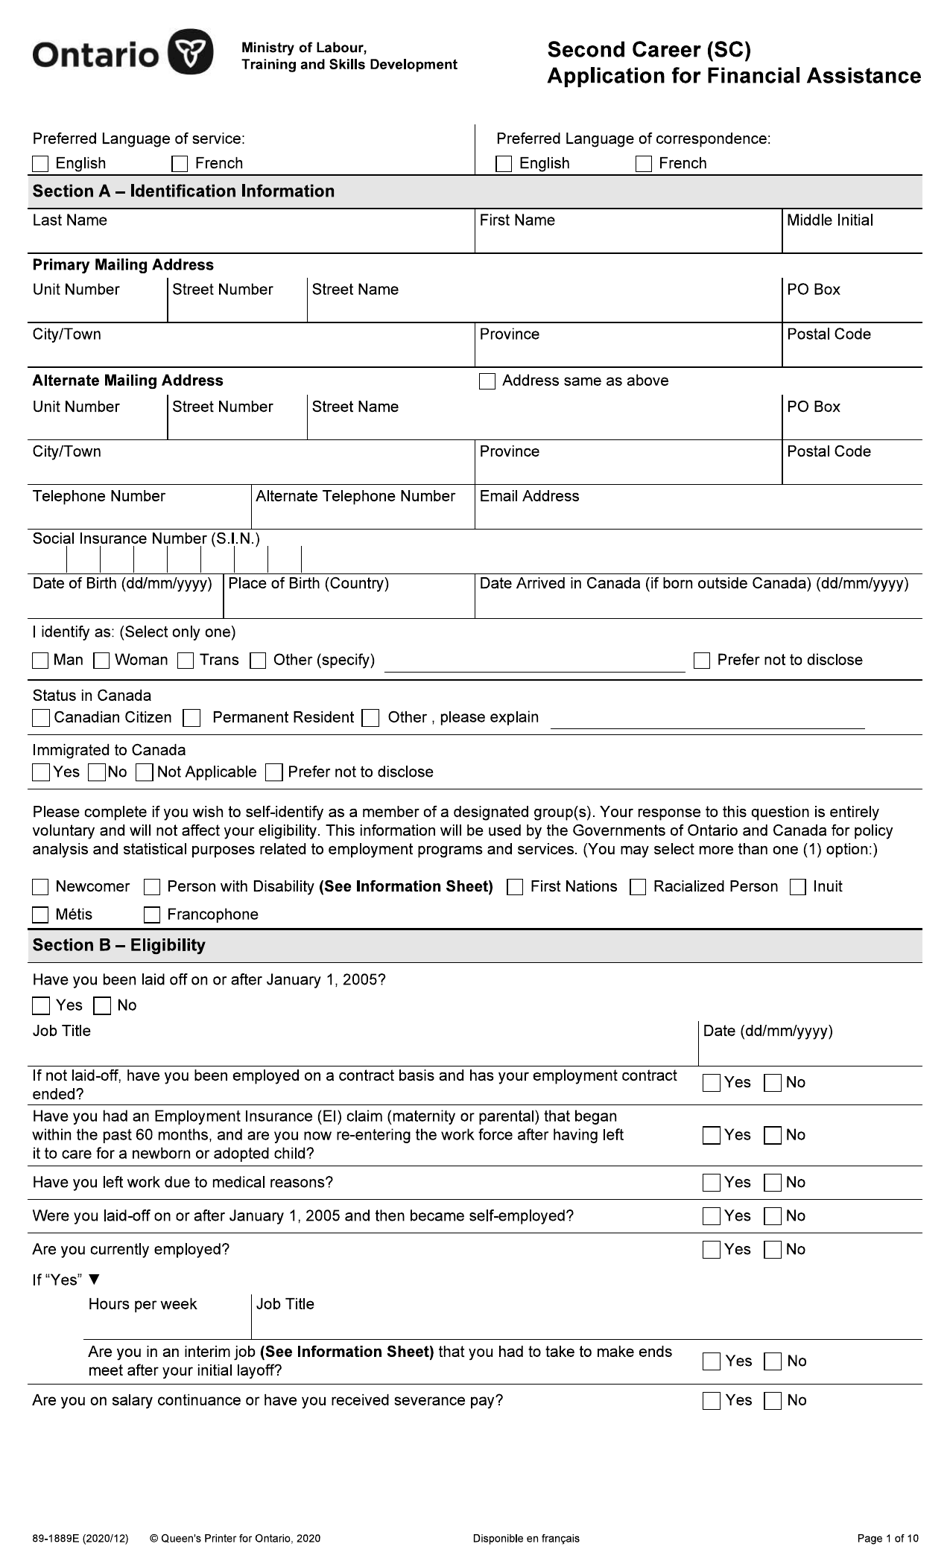 Form 89-1889E Second Career (Sc) Application for Financial Assistance - Ontario, Canada, Page 1